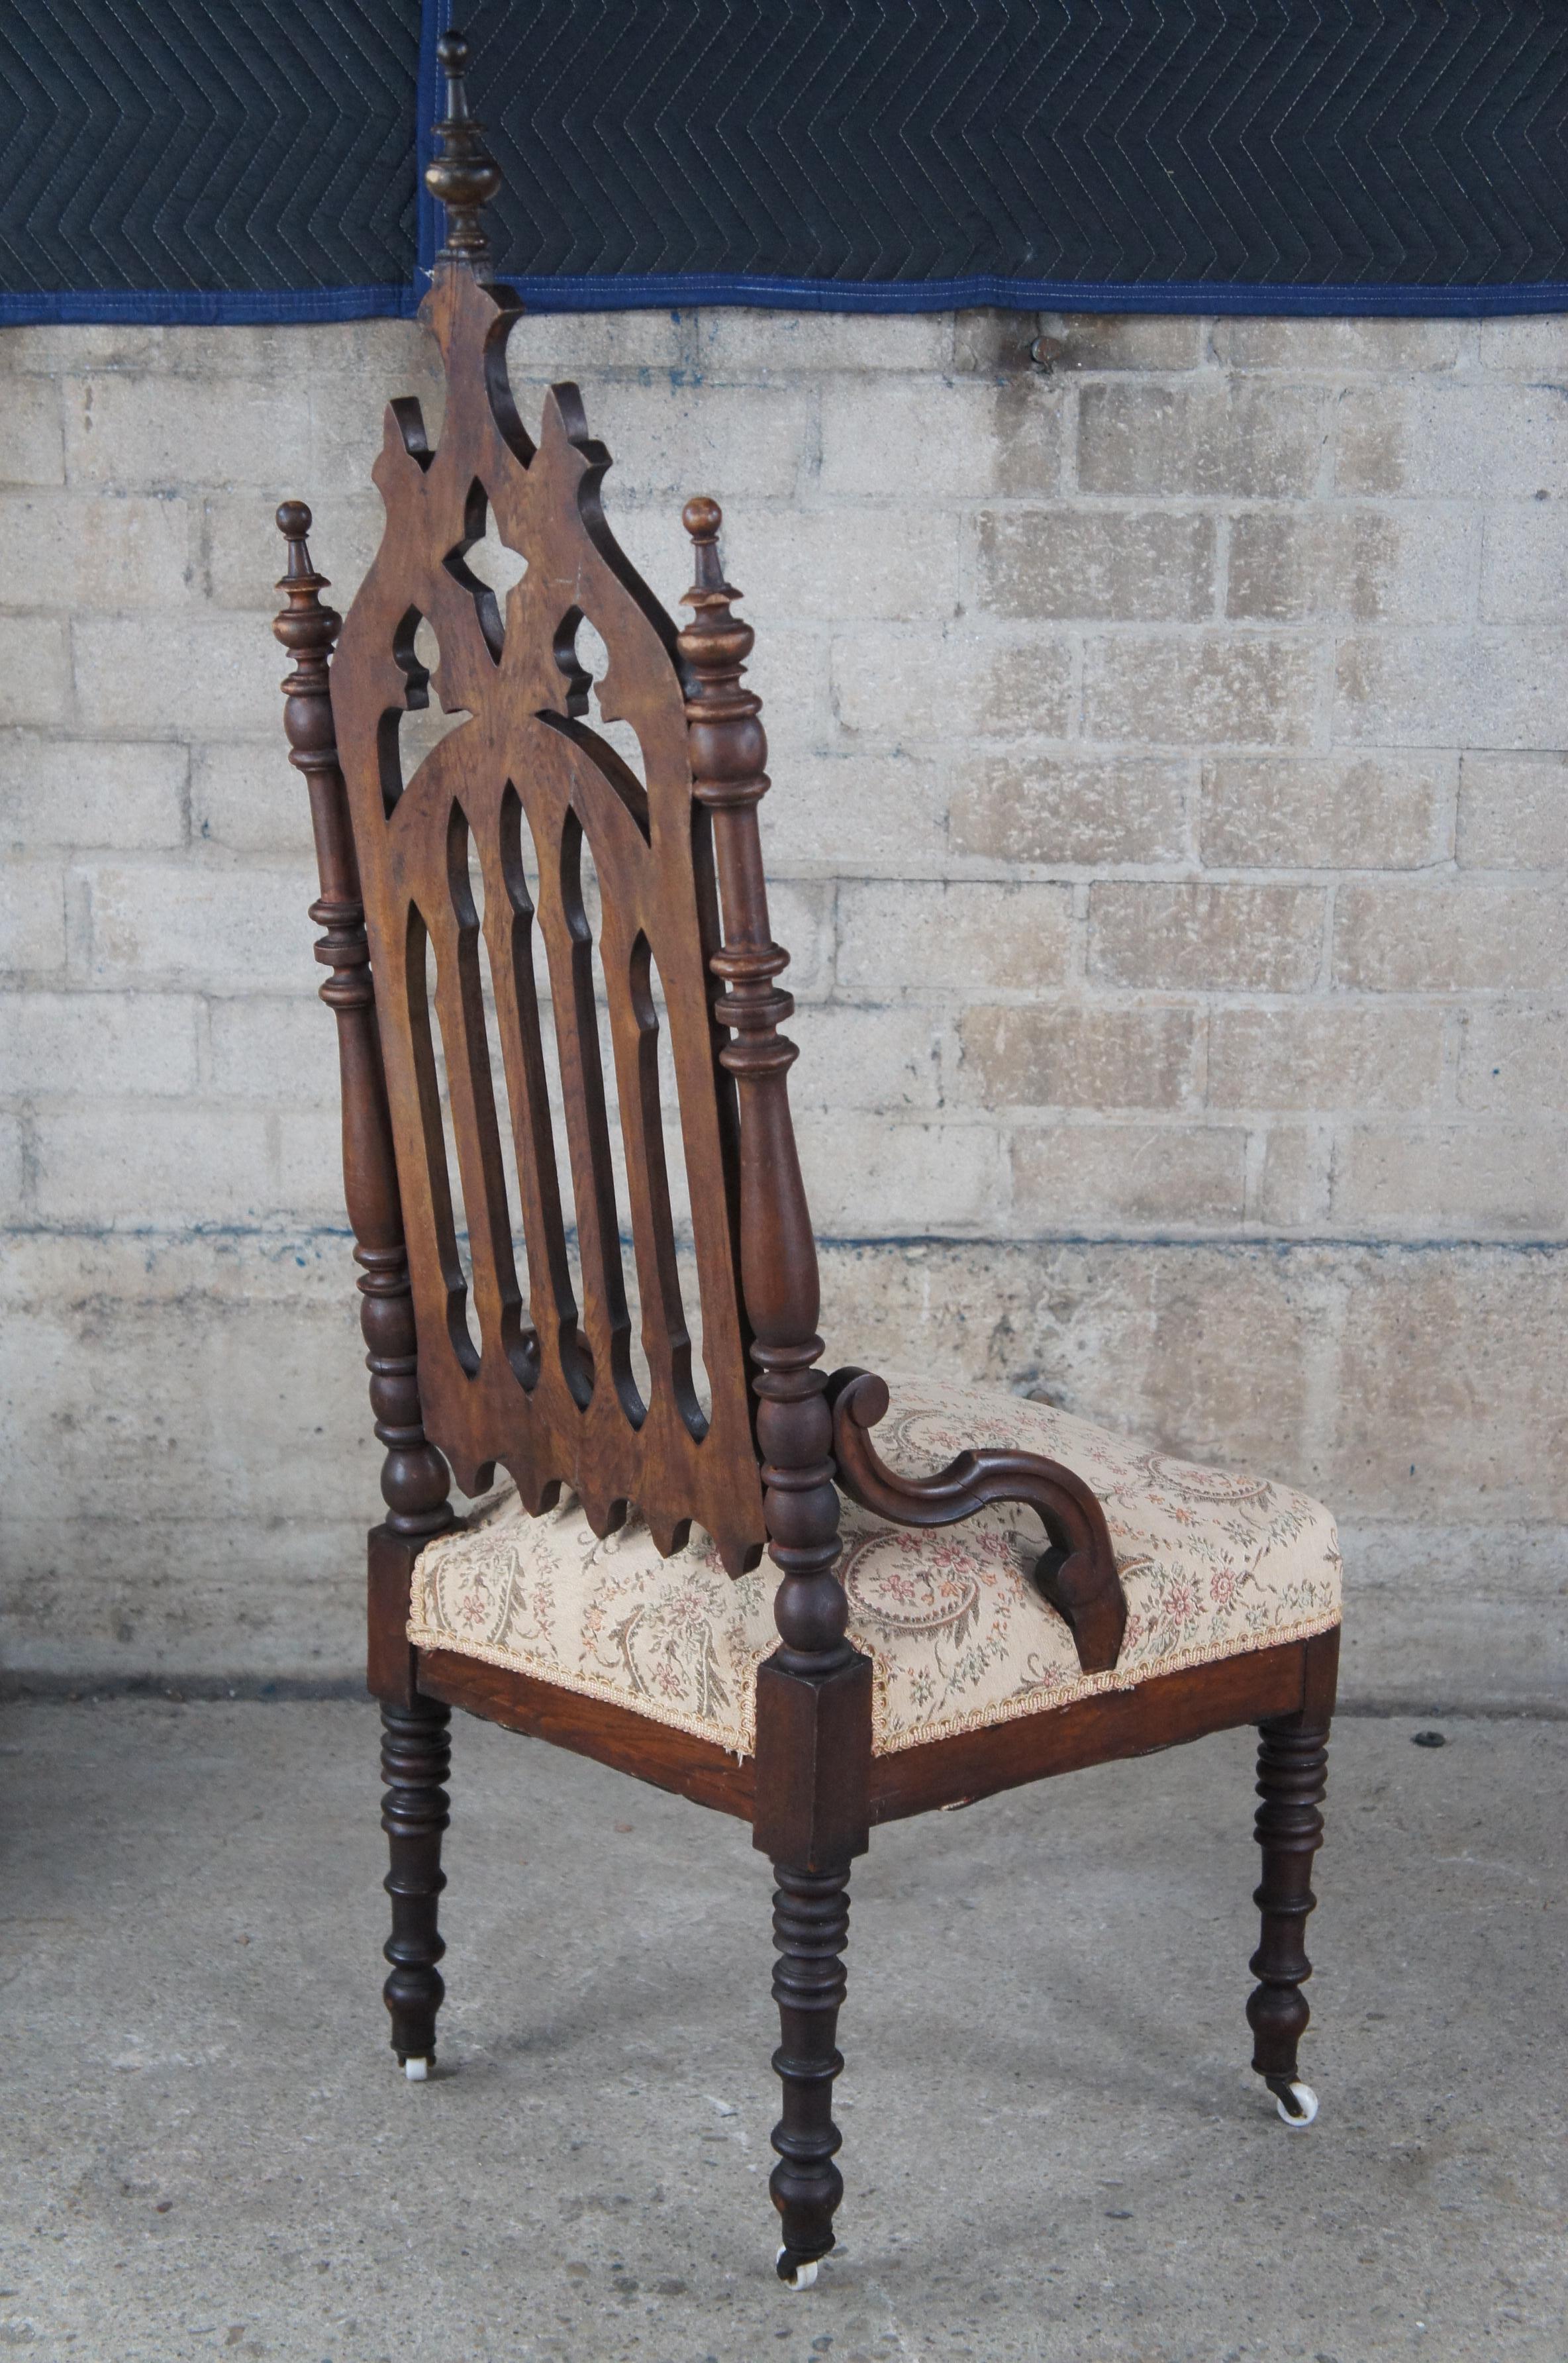 2 Antique Renaissance Gothic Revival Carved Mahogany Throne Dining Chairs In Good Condition For Sale In Dayton, OH